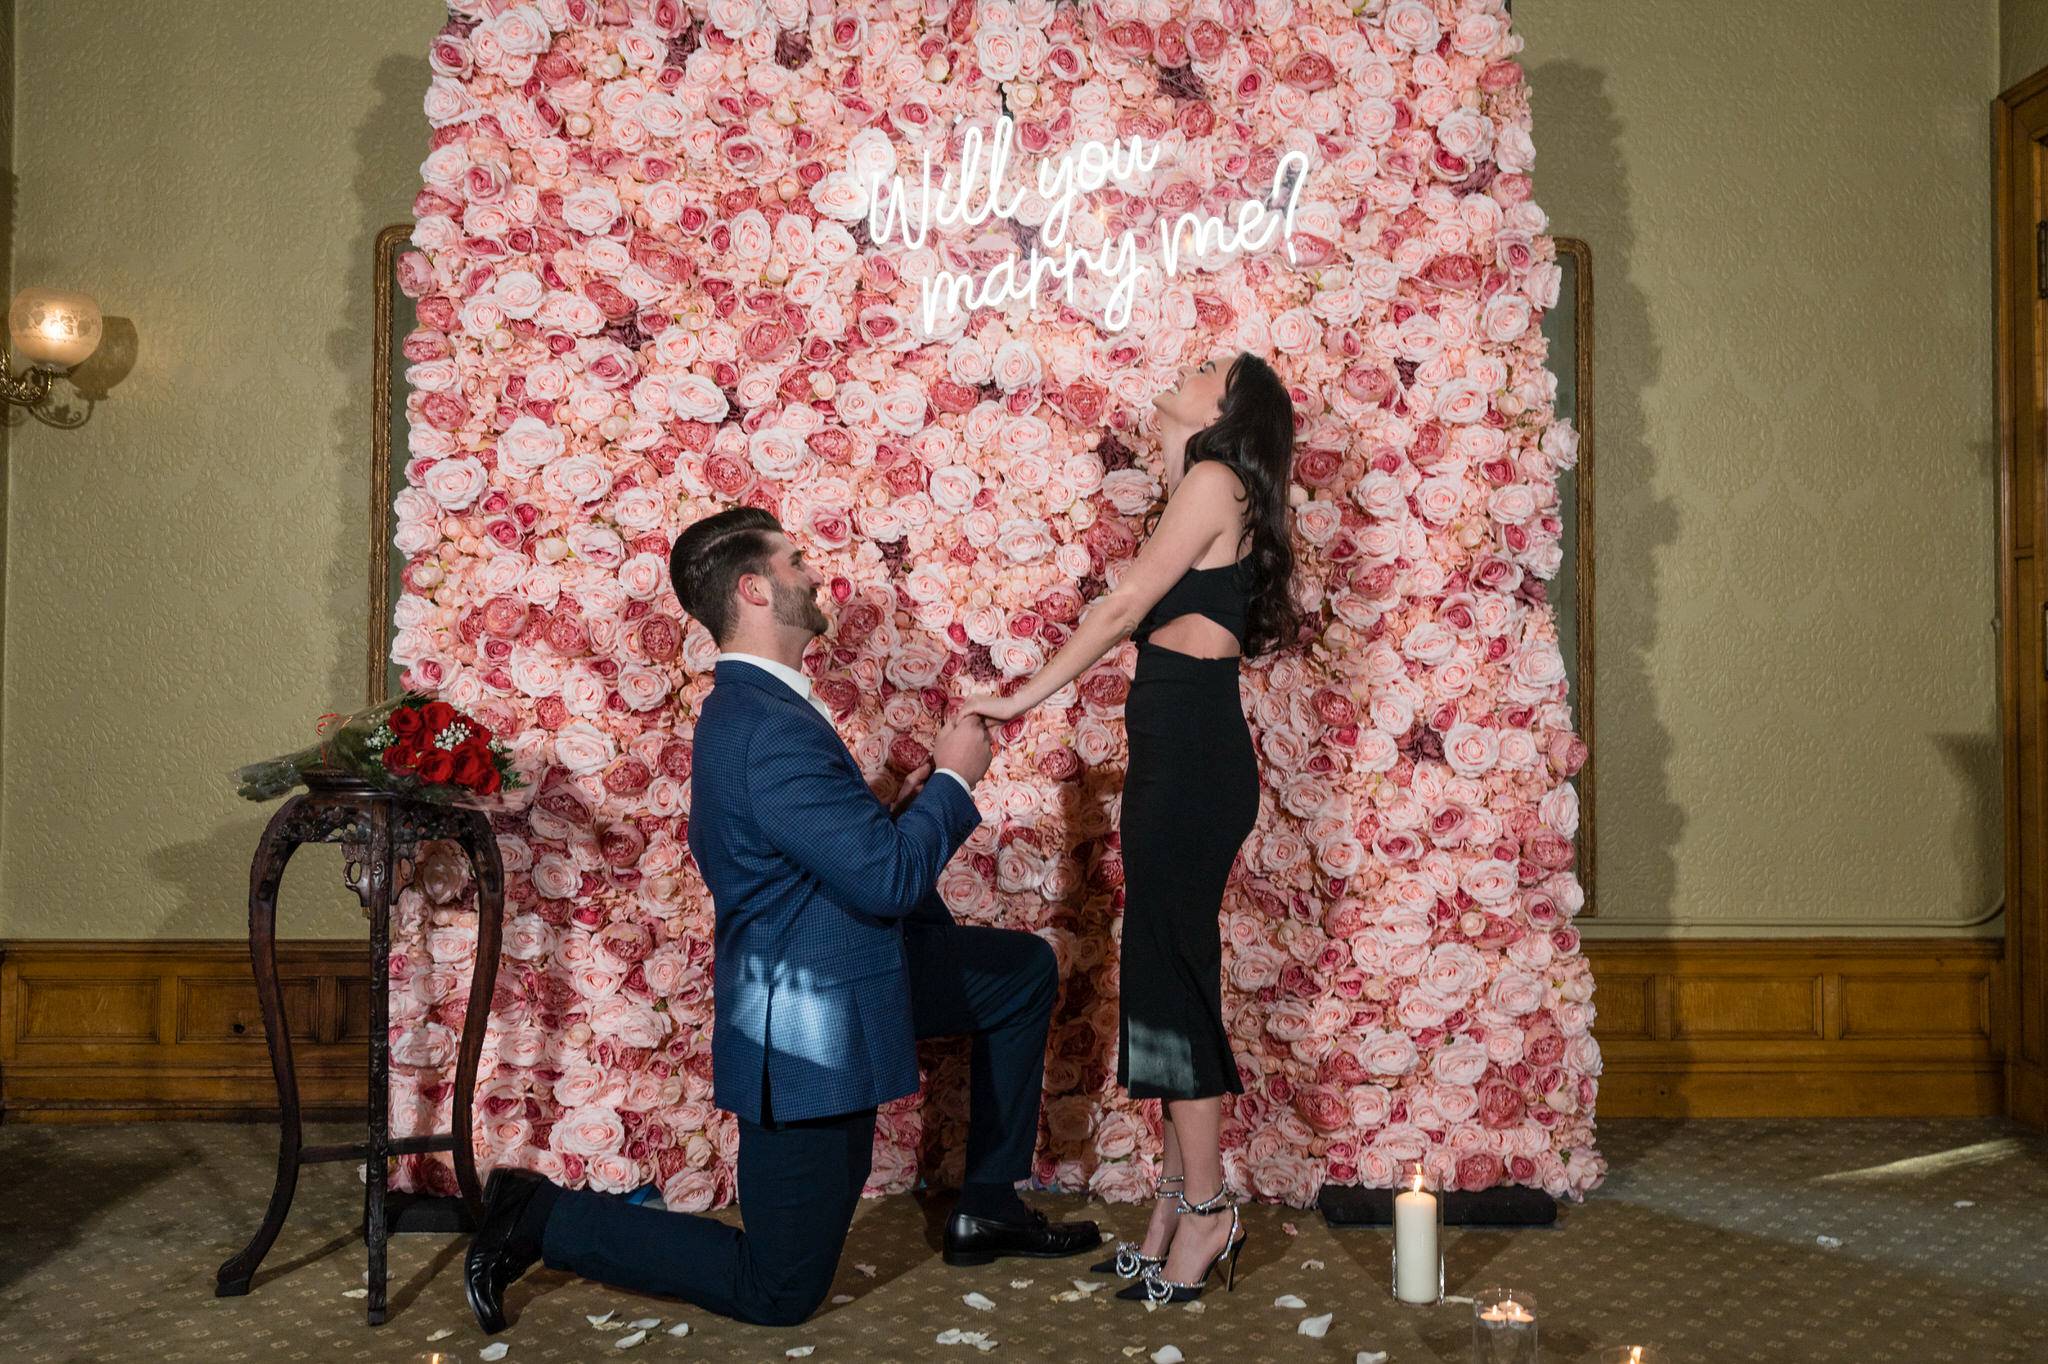 Marriage proposal at the Whitney Detroit in front of a pink rose flower wall